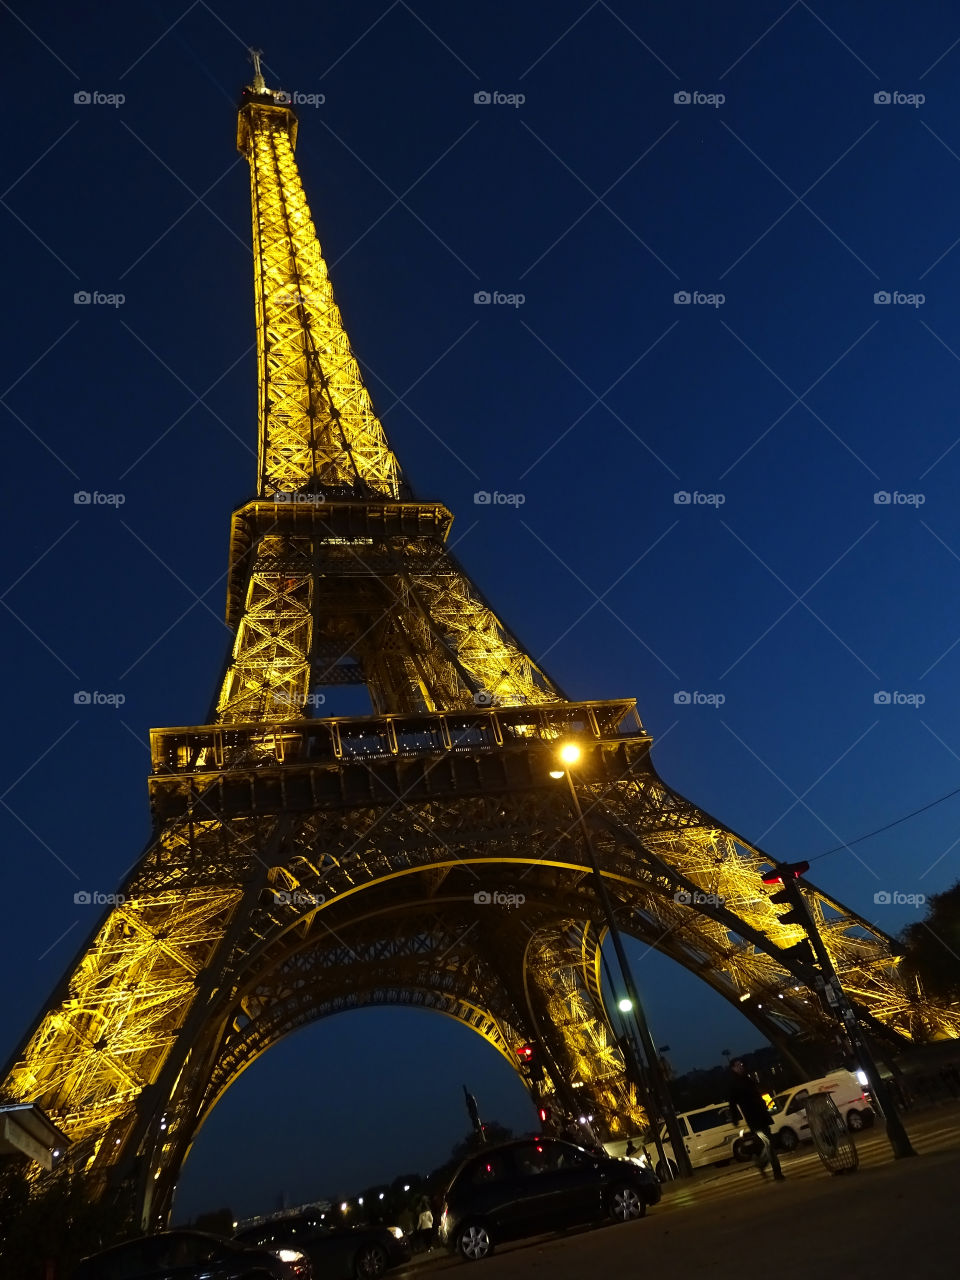 Beauty of an Eiffel tower at night